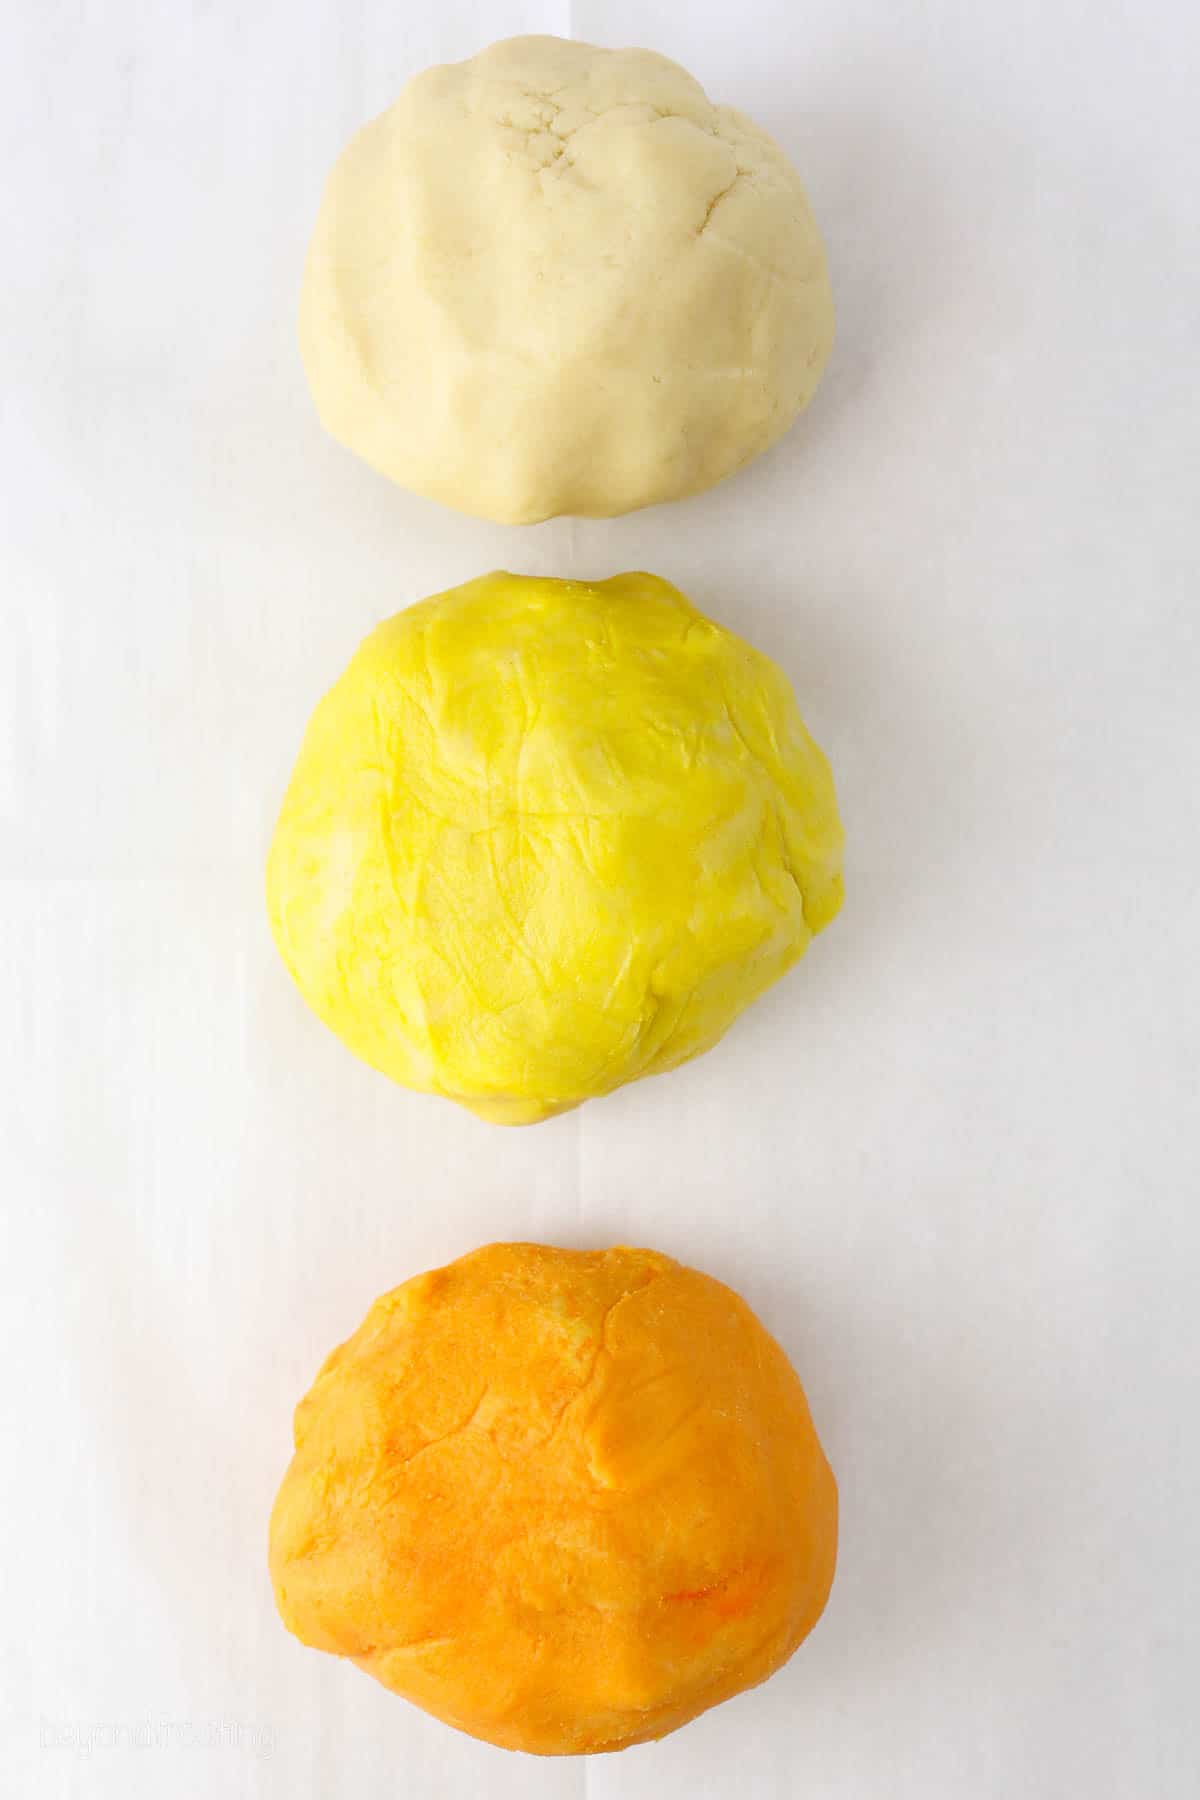 3 large balls of of cookie dough color white, yellow and orange.